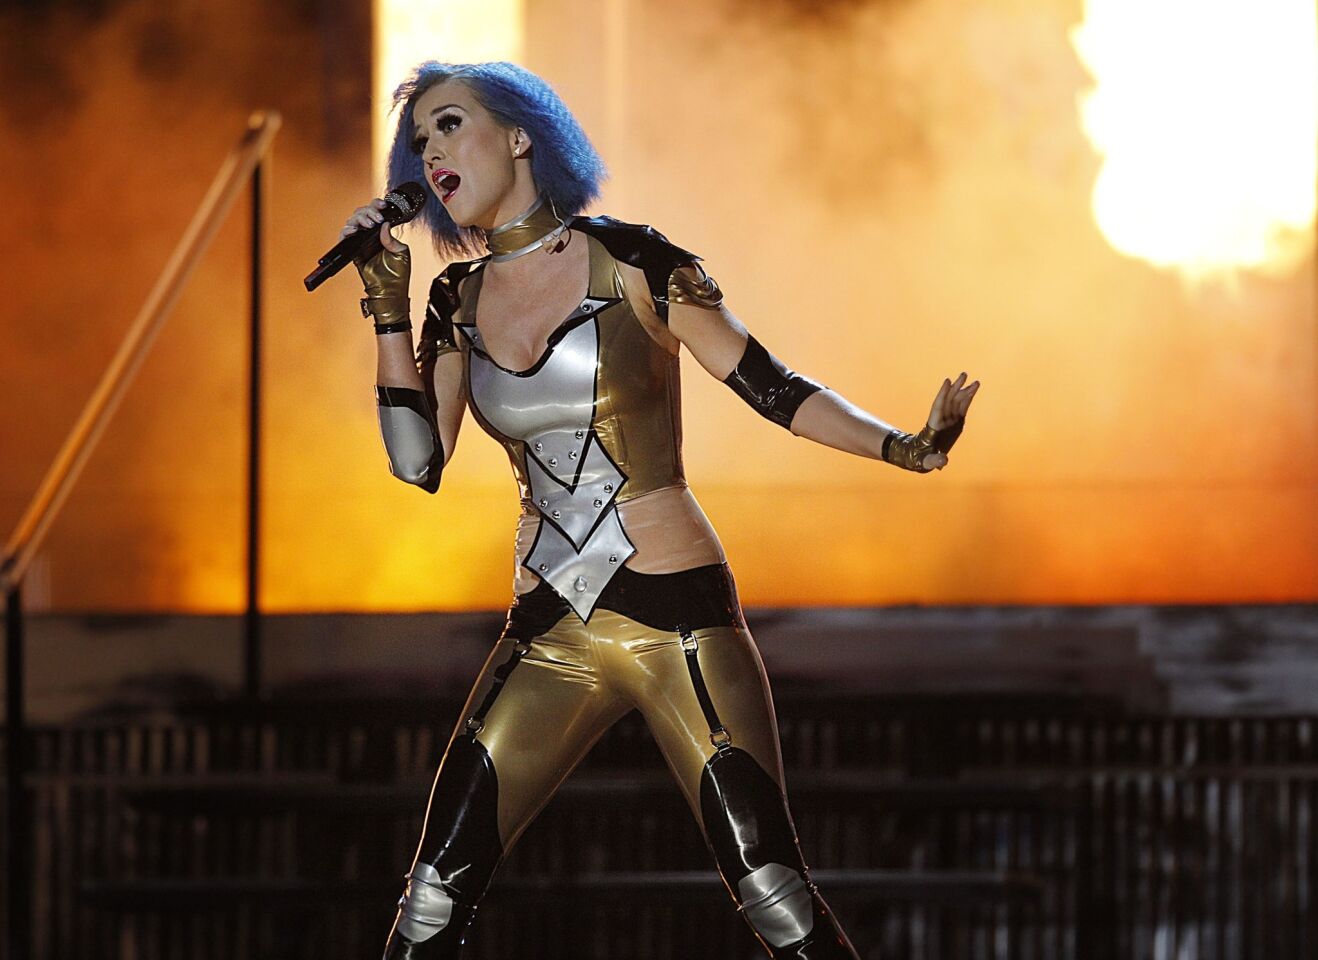 Katy Perry takes the stage during the 54th Grammy Awards at Staples Center in Los Angeles.